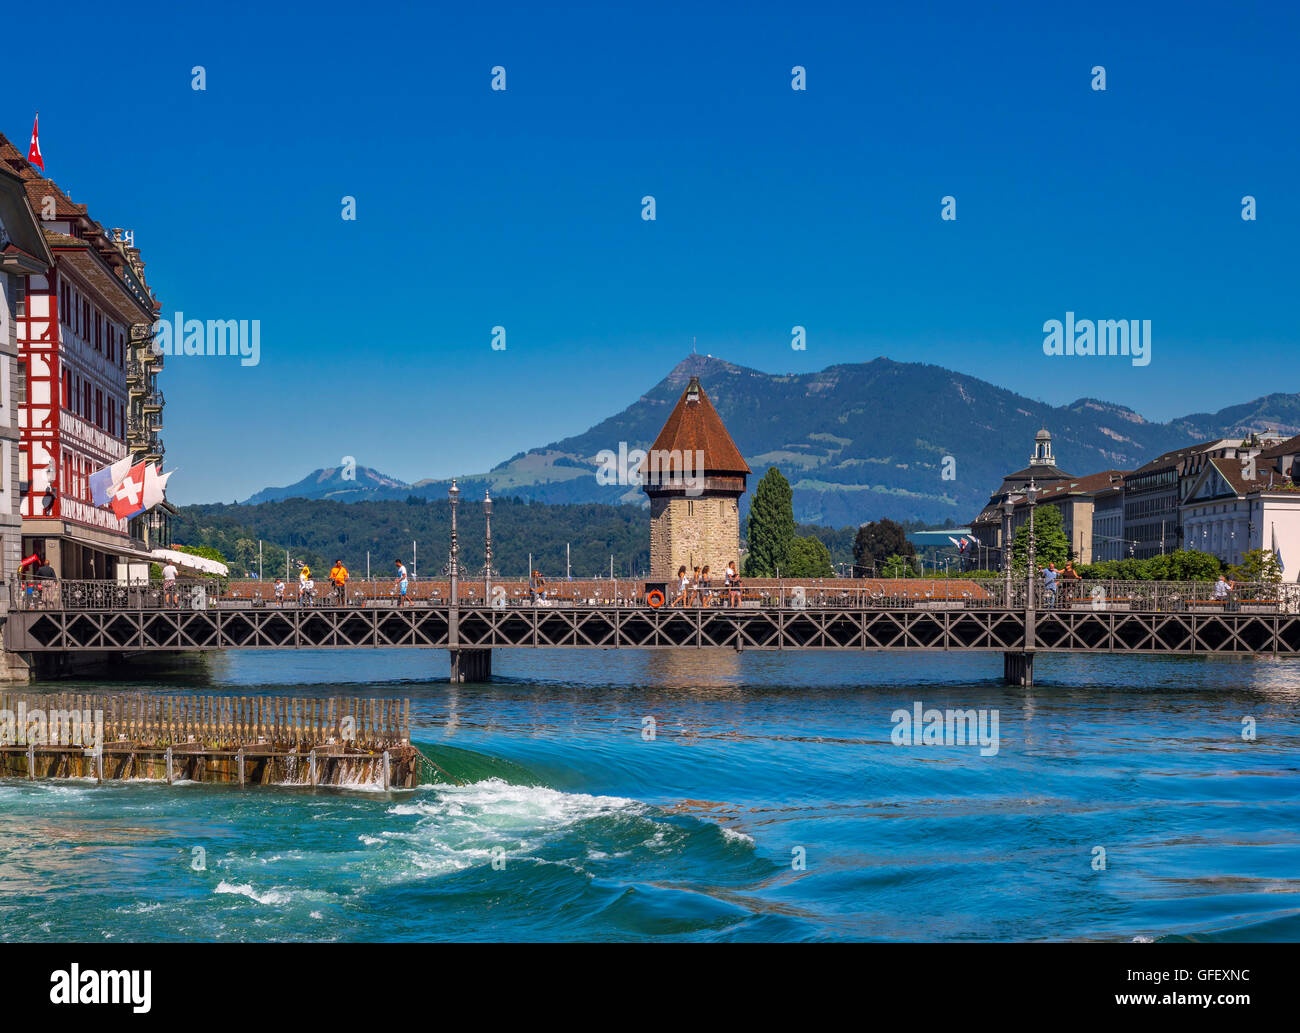 Old Town and Bridge on the river Reuss in Lucerne, Switzerland, Europe Stock Photo